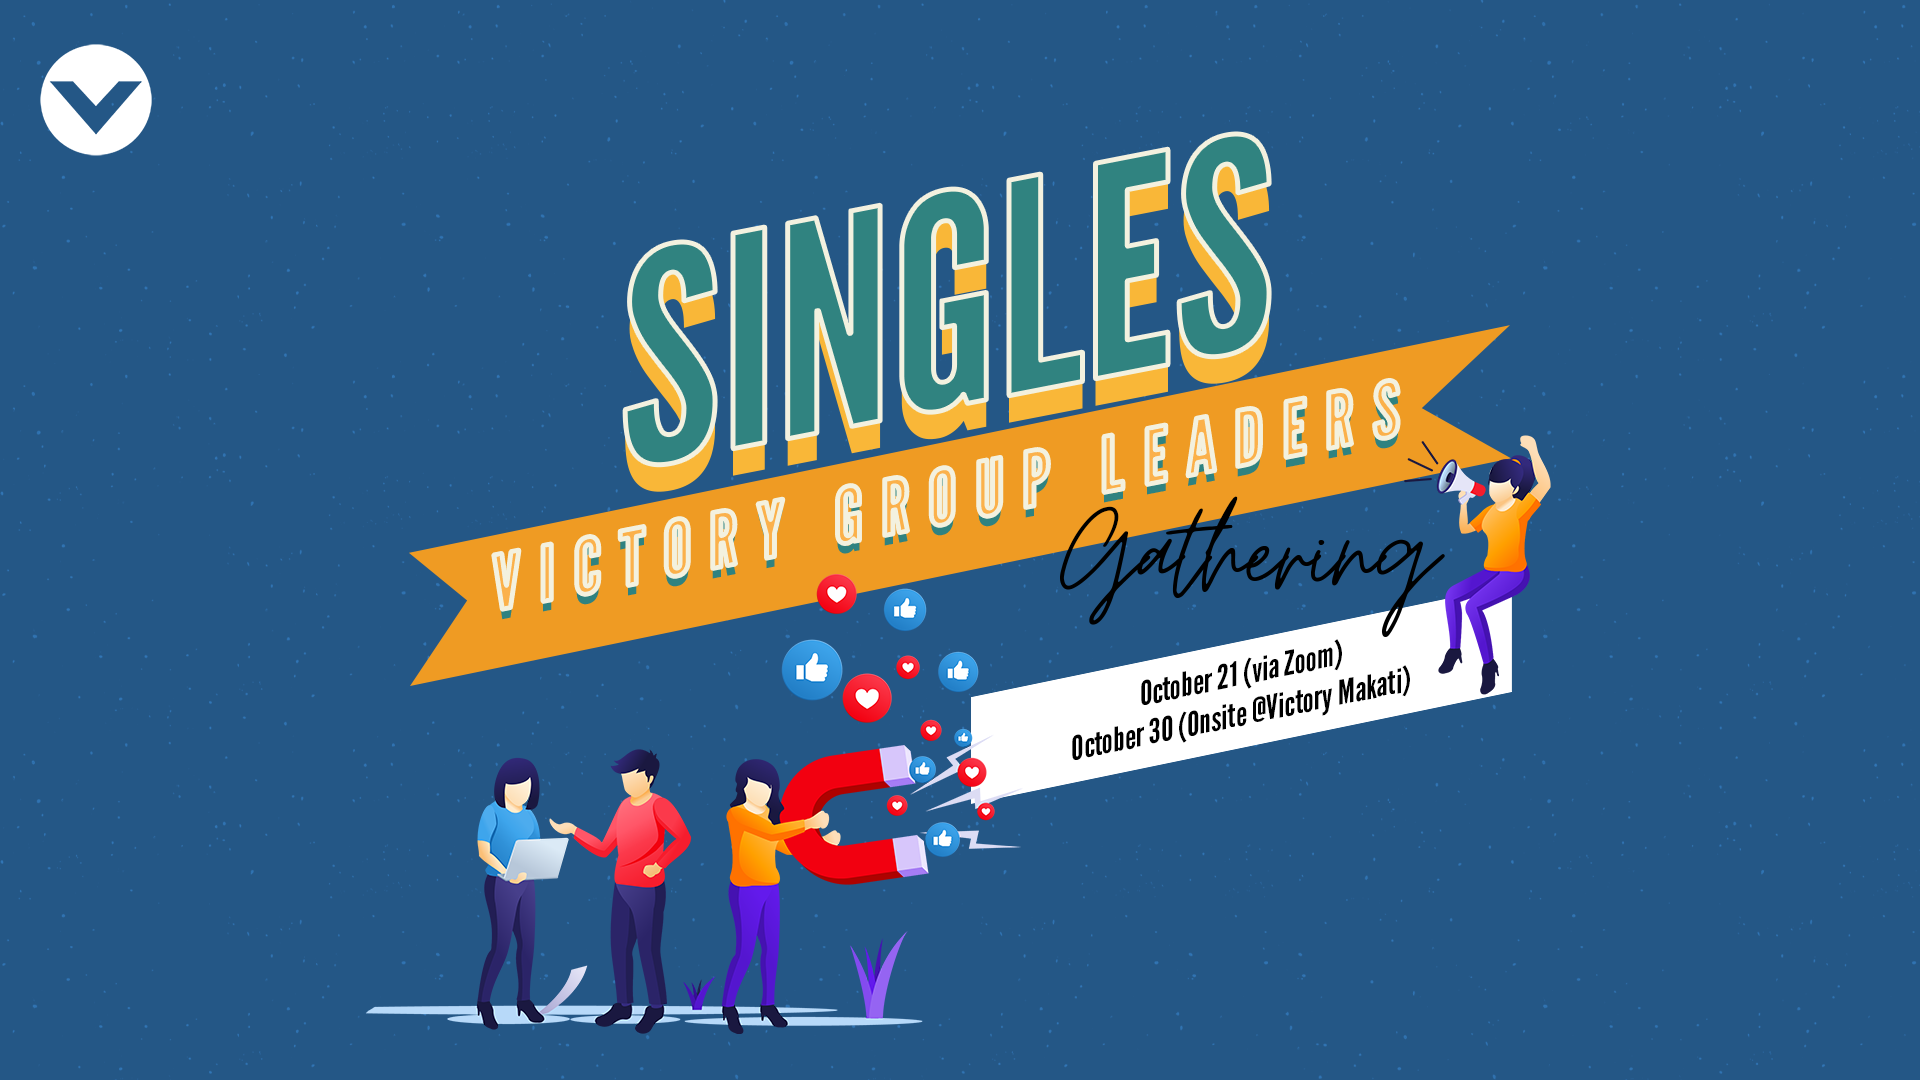 Single Victory group leaders gathering